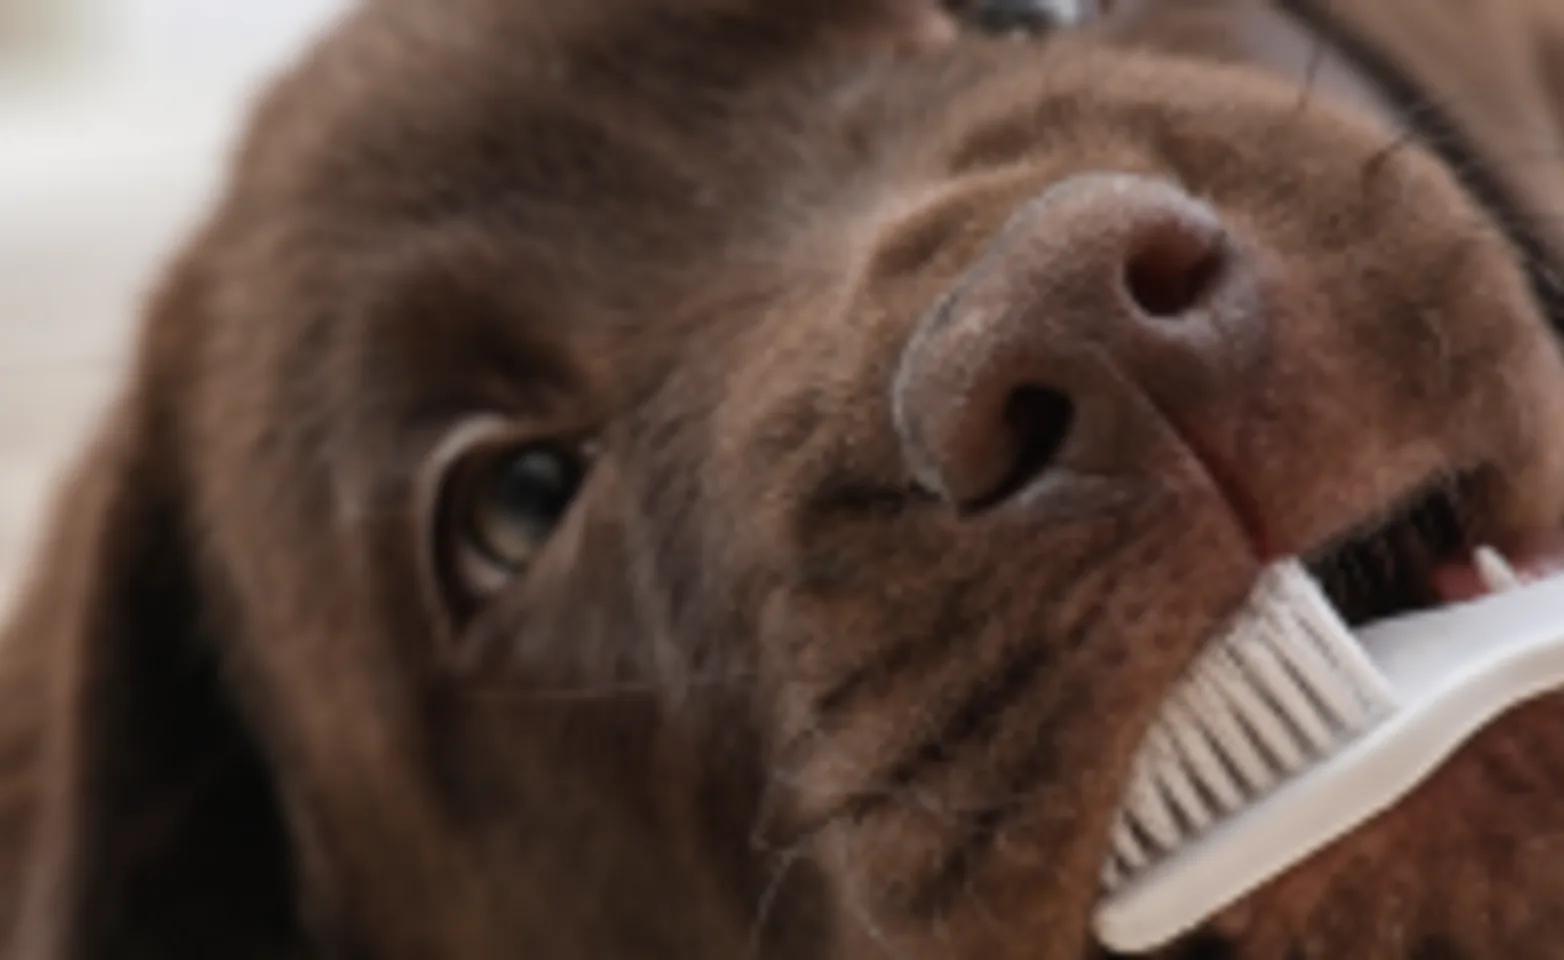 A brown dog laying down and getting their teeth cleaned with a tooth brush.